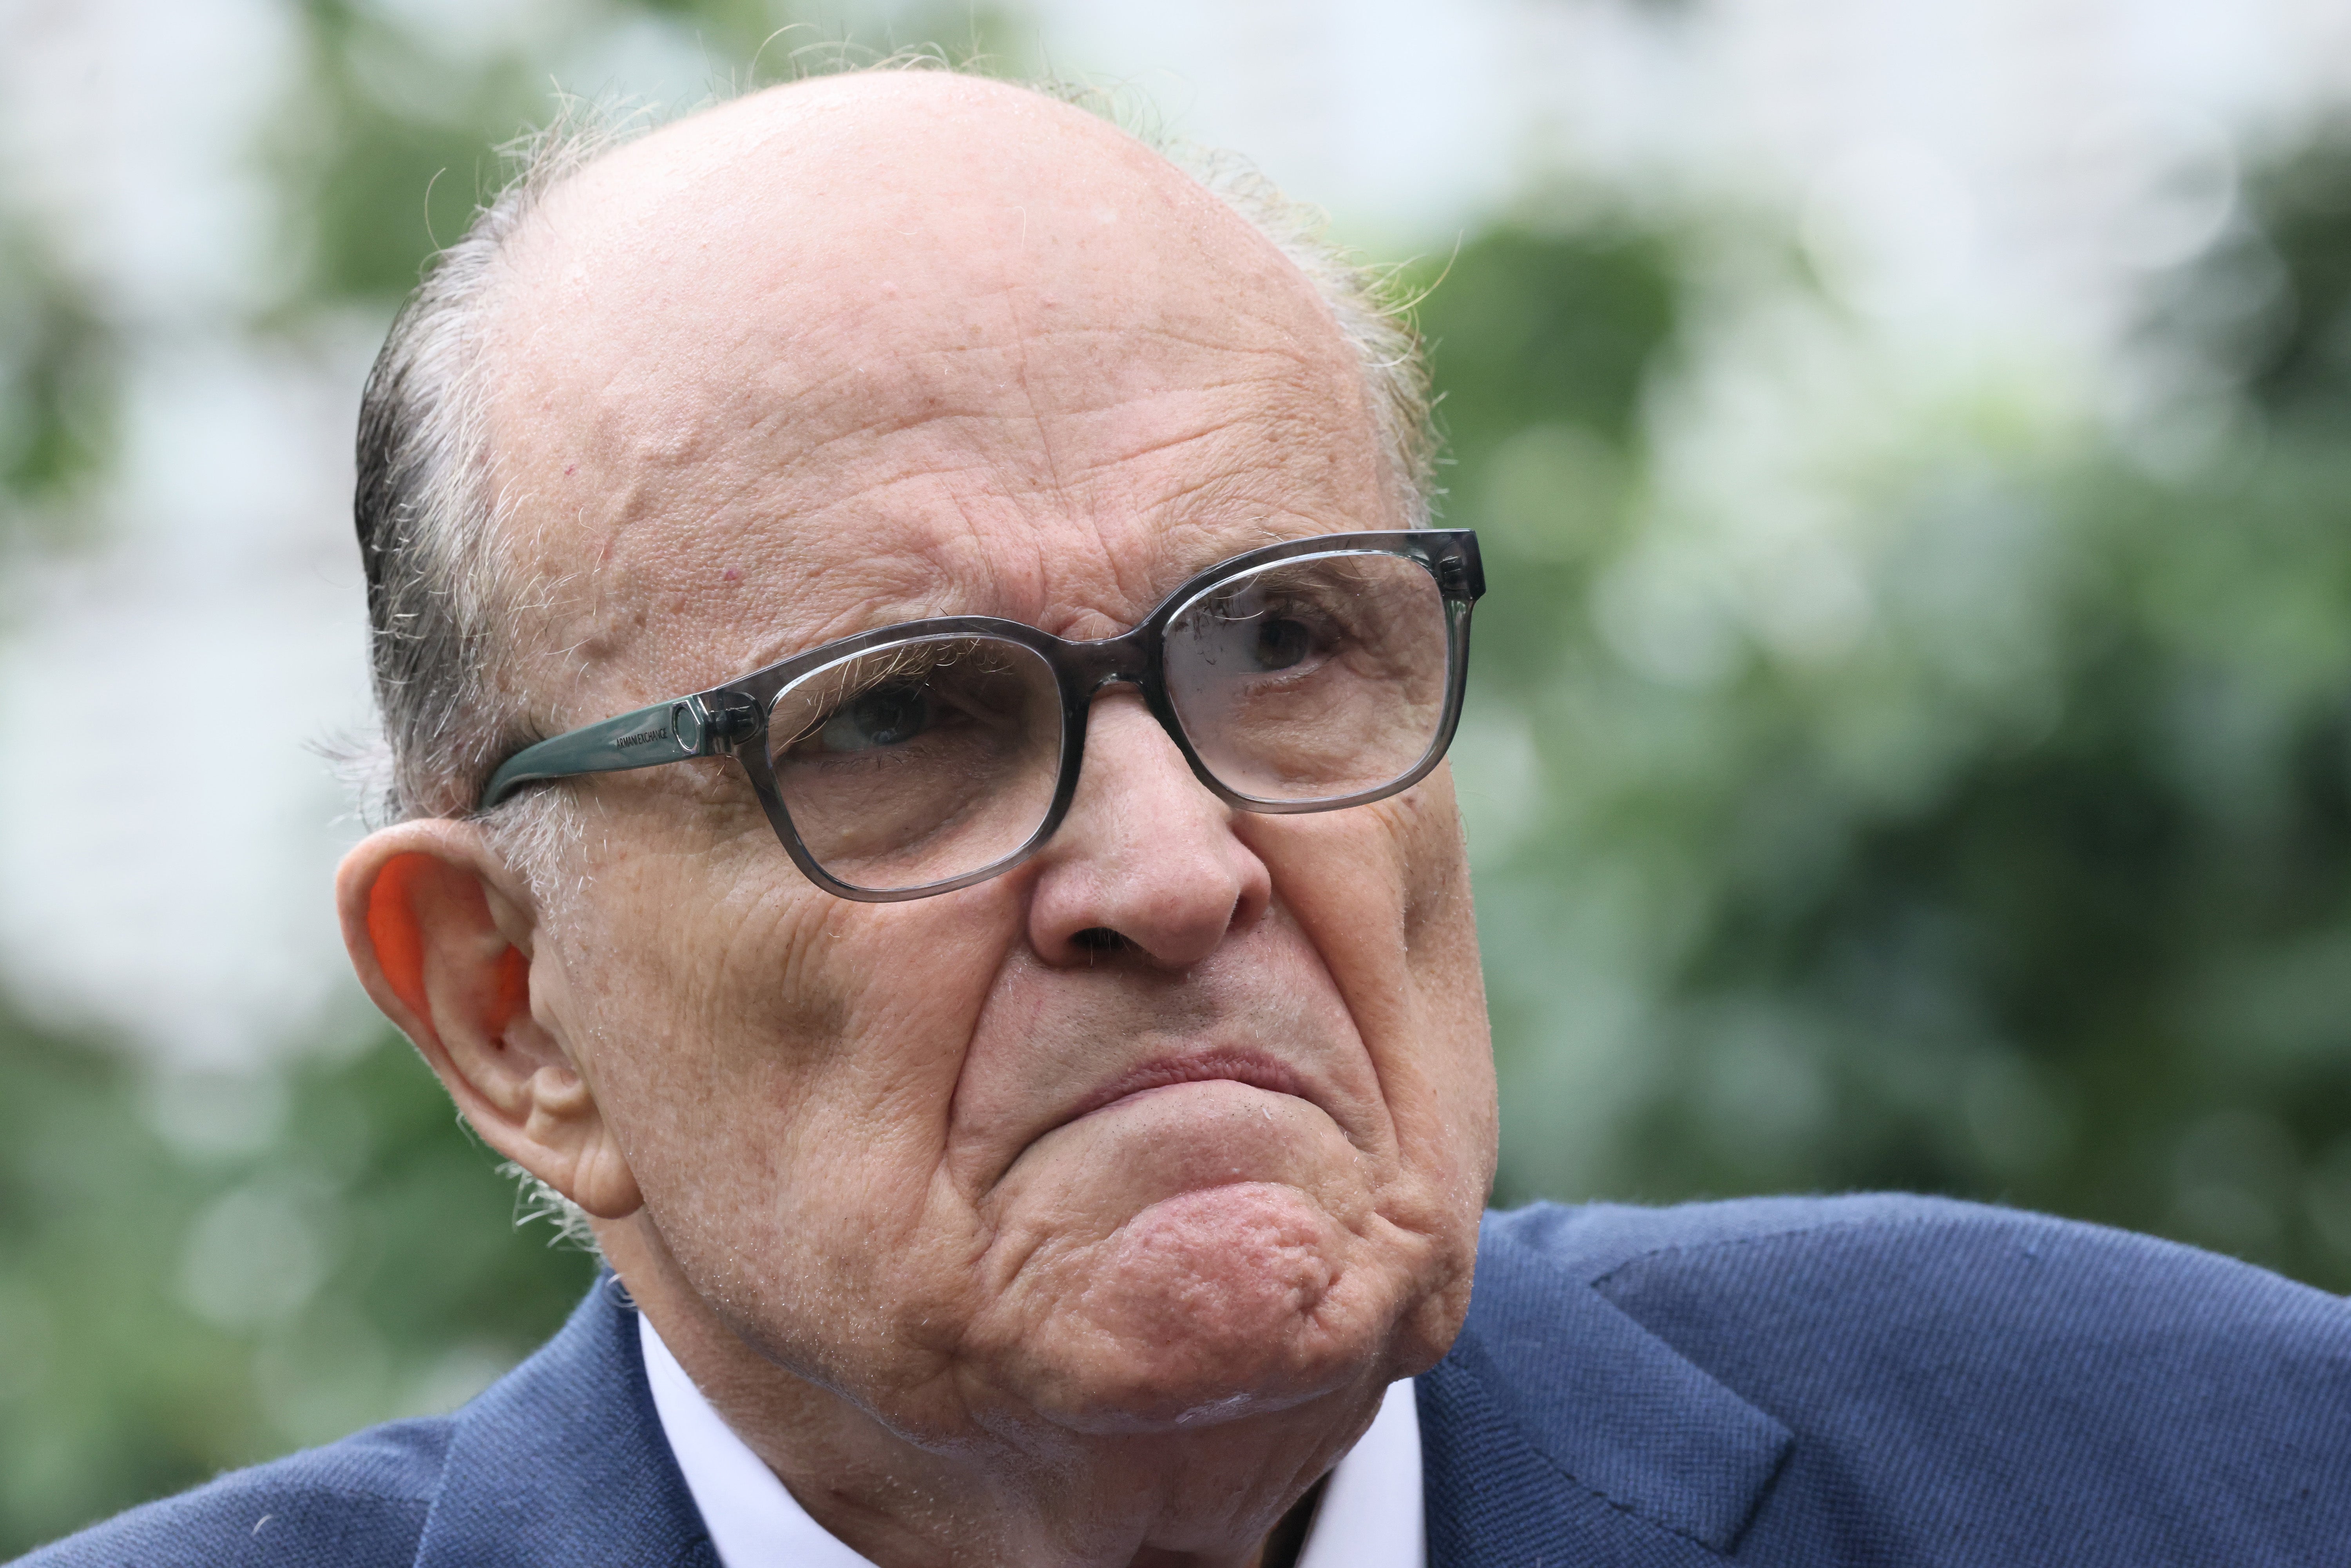 Rudy Giuliani demanded a 10 per cent stake in PayPal in return for becoming a political fixer, according to a new Elon Musk biography